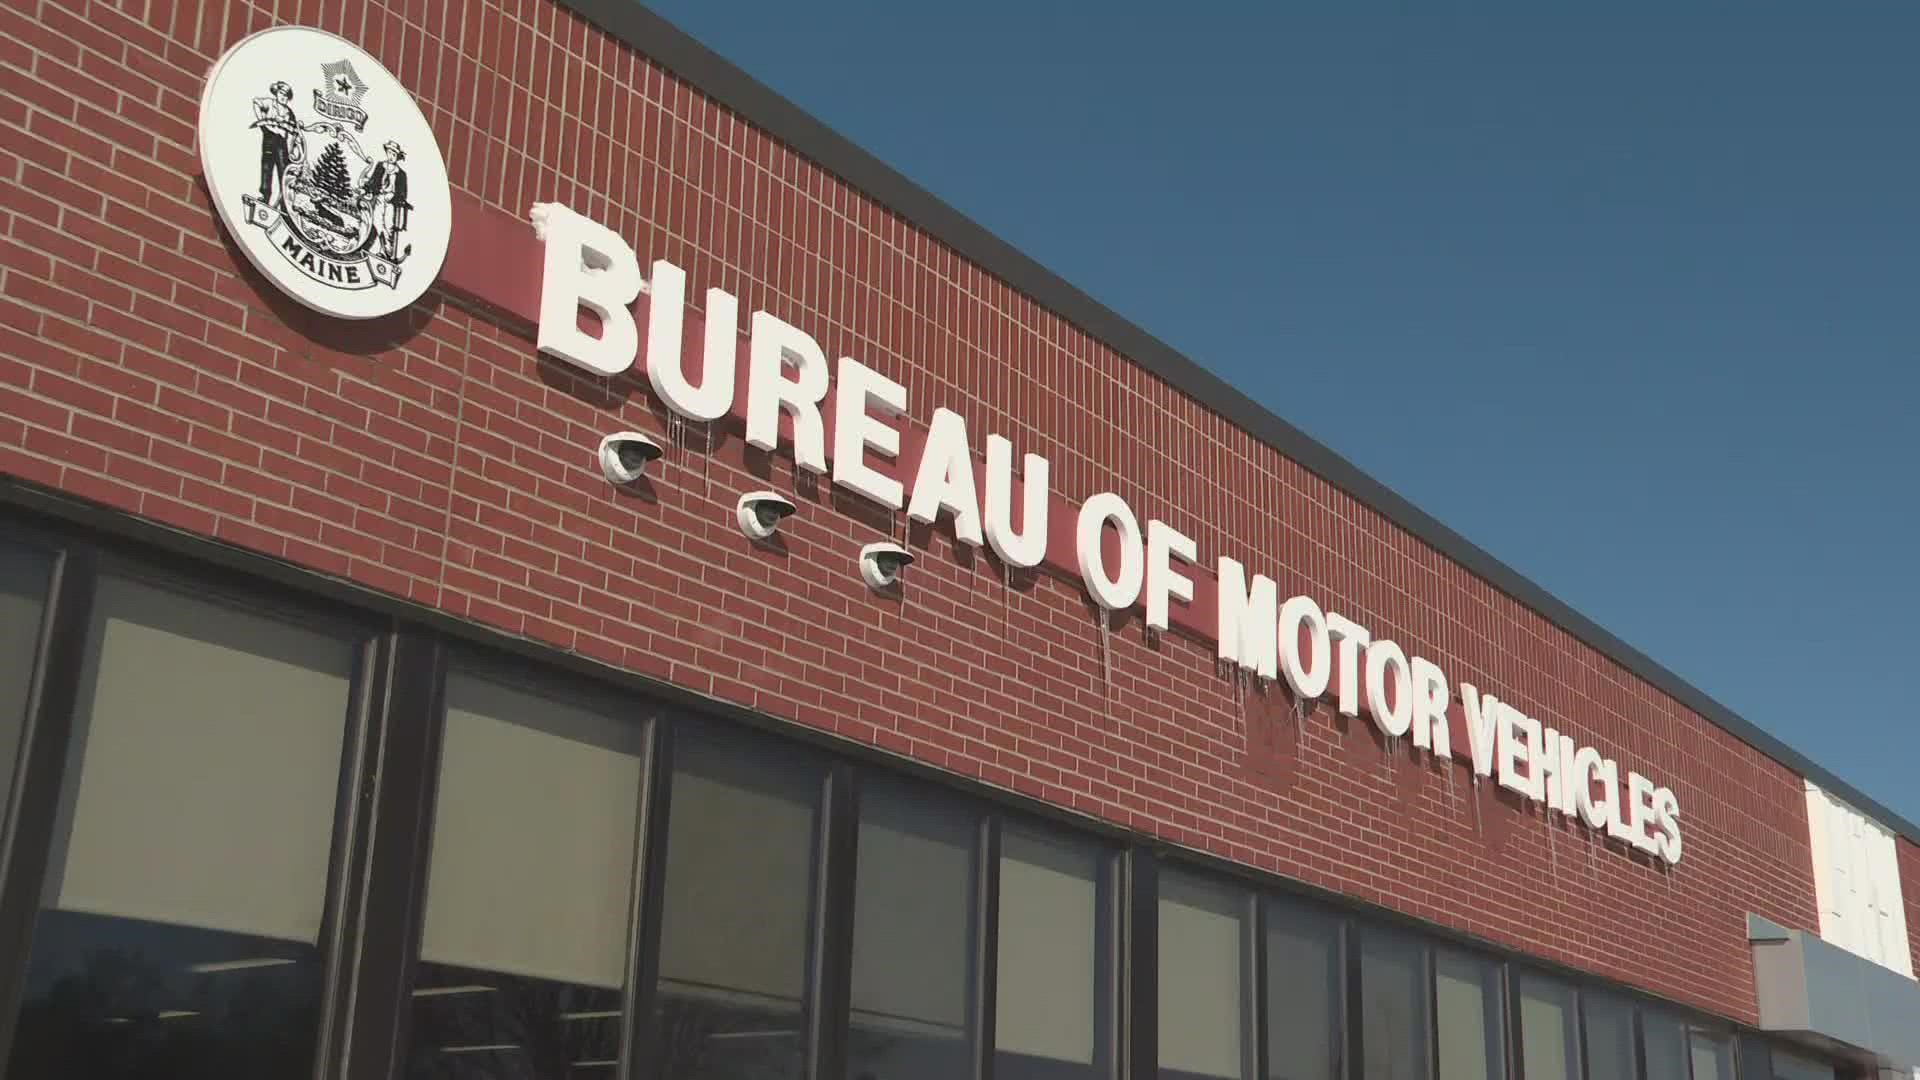 The Bangor branch of the Bureau of Motor Vehicles has moved from the Airport Mall to a new address on Griffin Road.